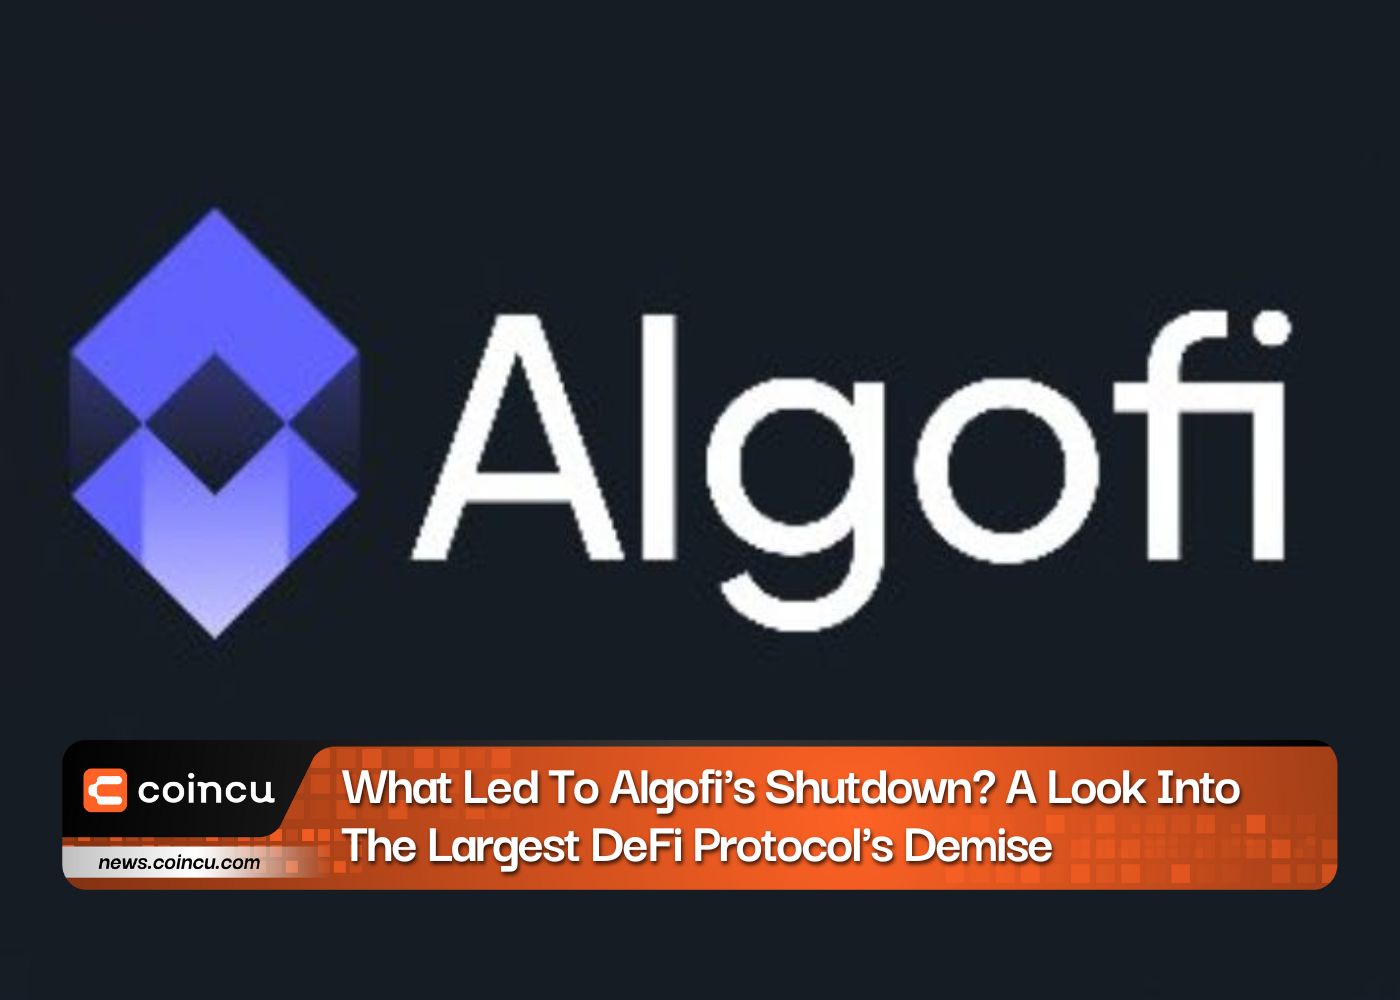 What Led To Algofi's Shutdown? A Look Into The Largest DeFi Protocol's Demise